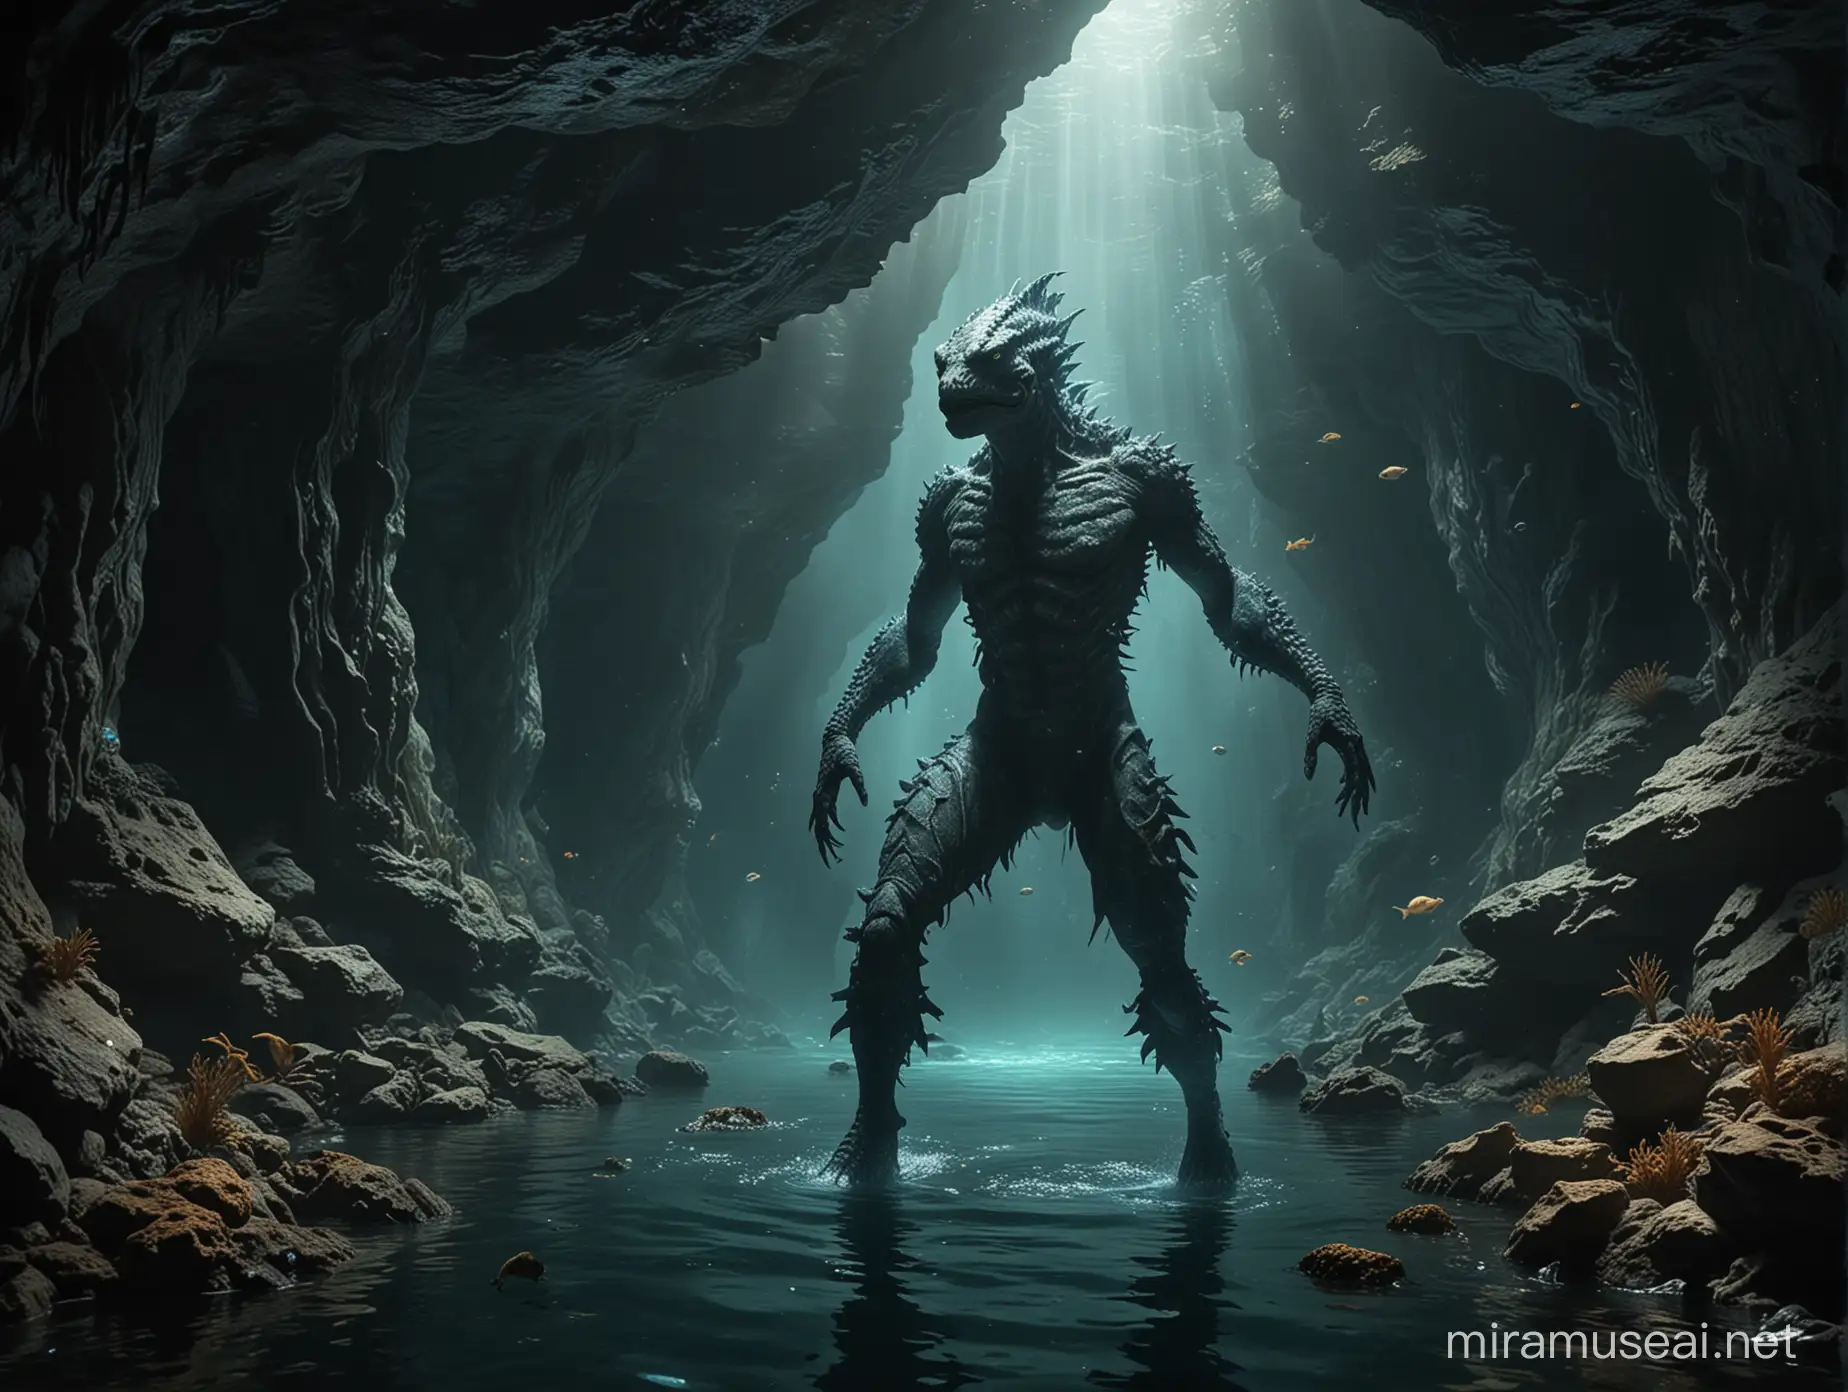 A mysterious and cinematic scene featuring a scaly humanoid sea creature with a human torso and arms, fish-like head, and two fish tails as legs, it lives in underwater caves and likes to grapple its human victims. 